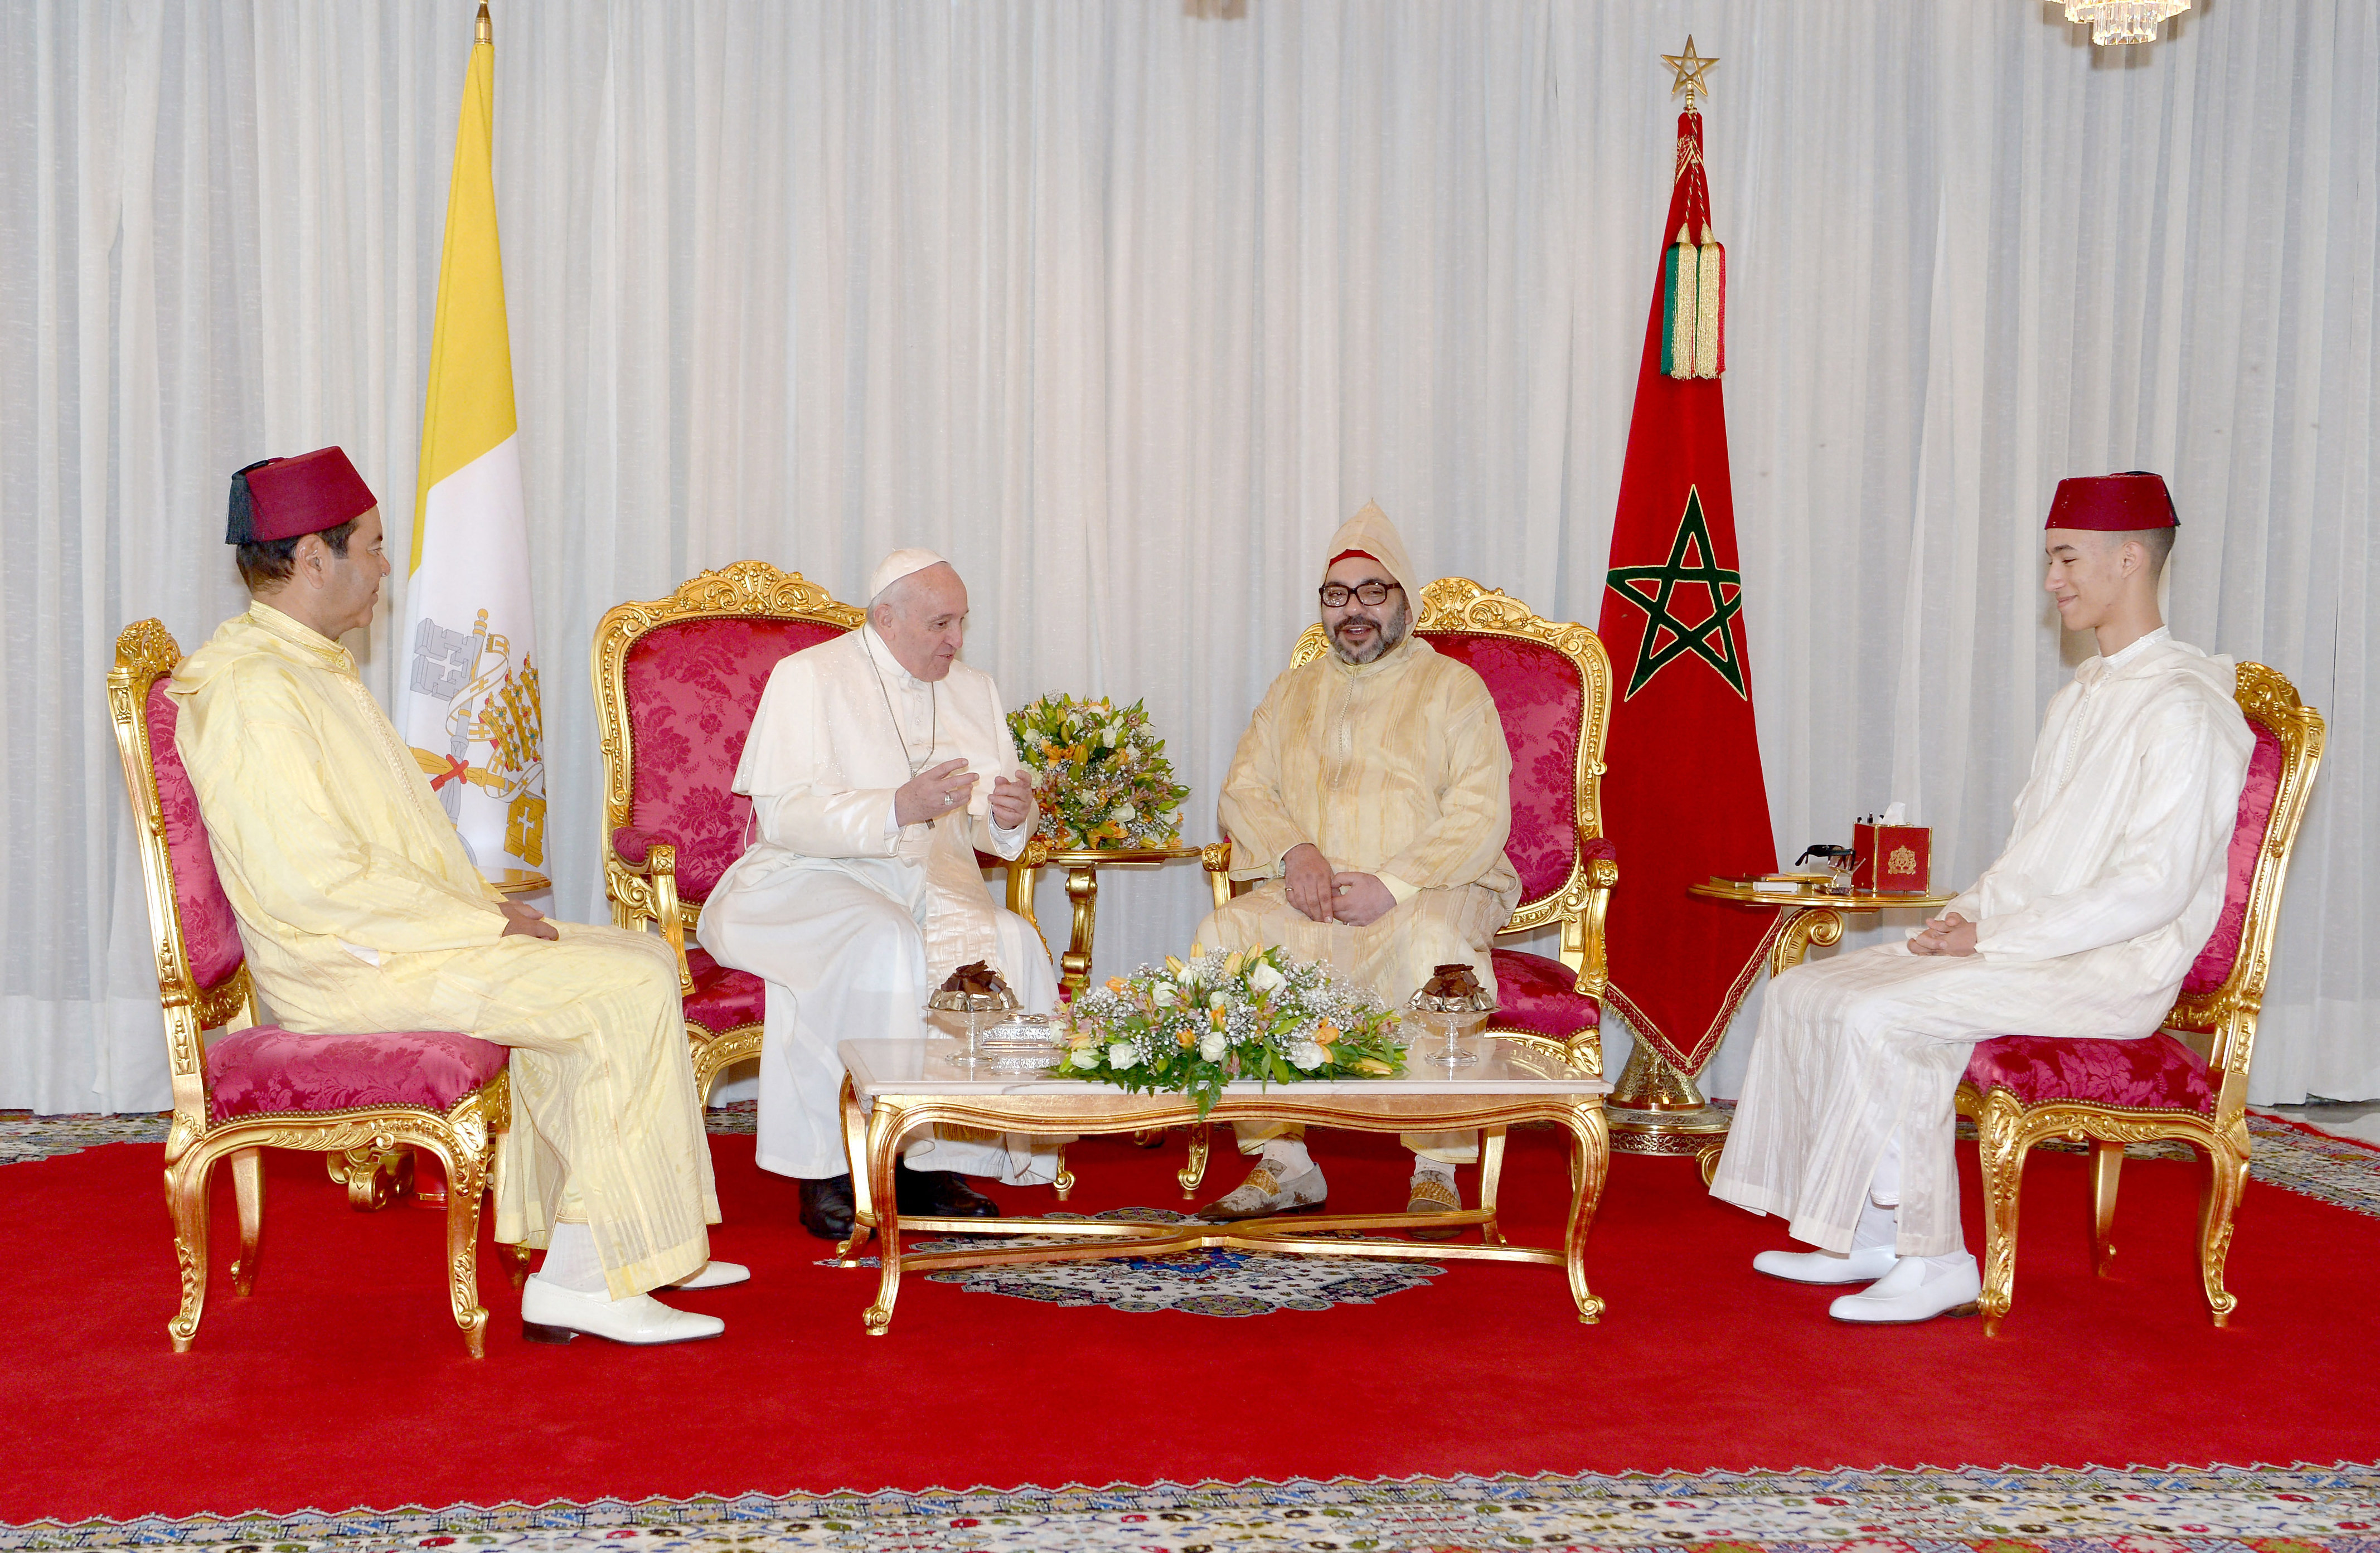 Pope and Moroccoan King make joint appeal to protect Jerusalem status quo